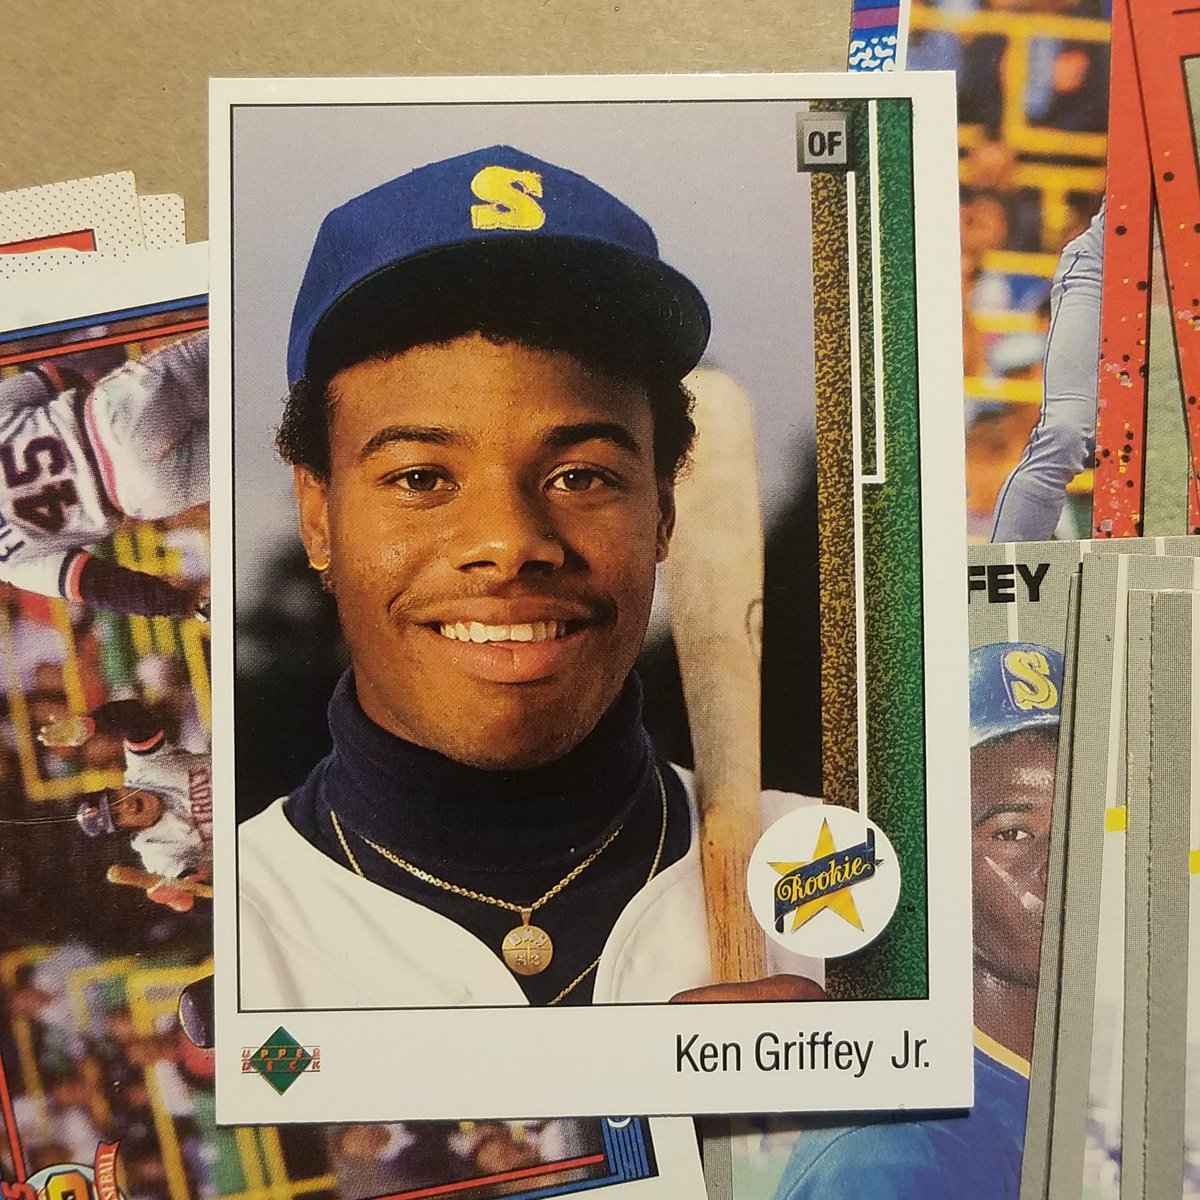 been going through my old baseball card collection... found one of these gems.

#kengriffeyjr #baseballcards #BaseBall #upperdeck